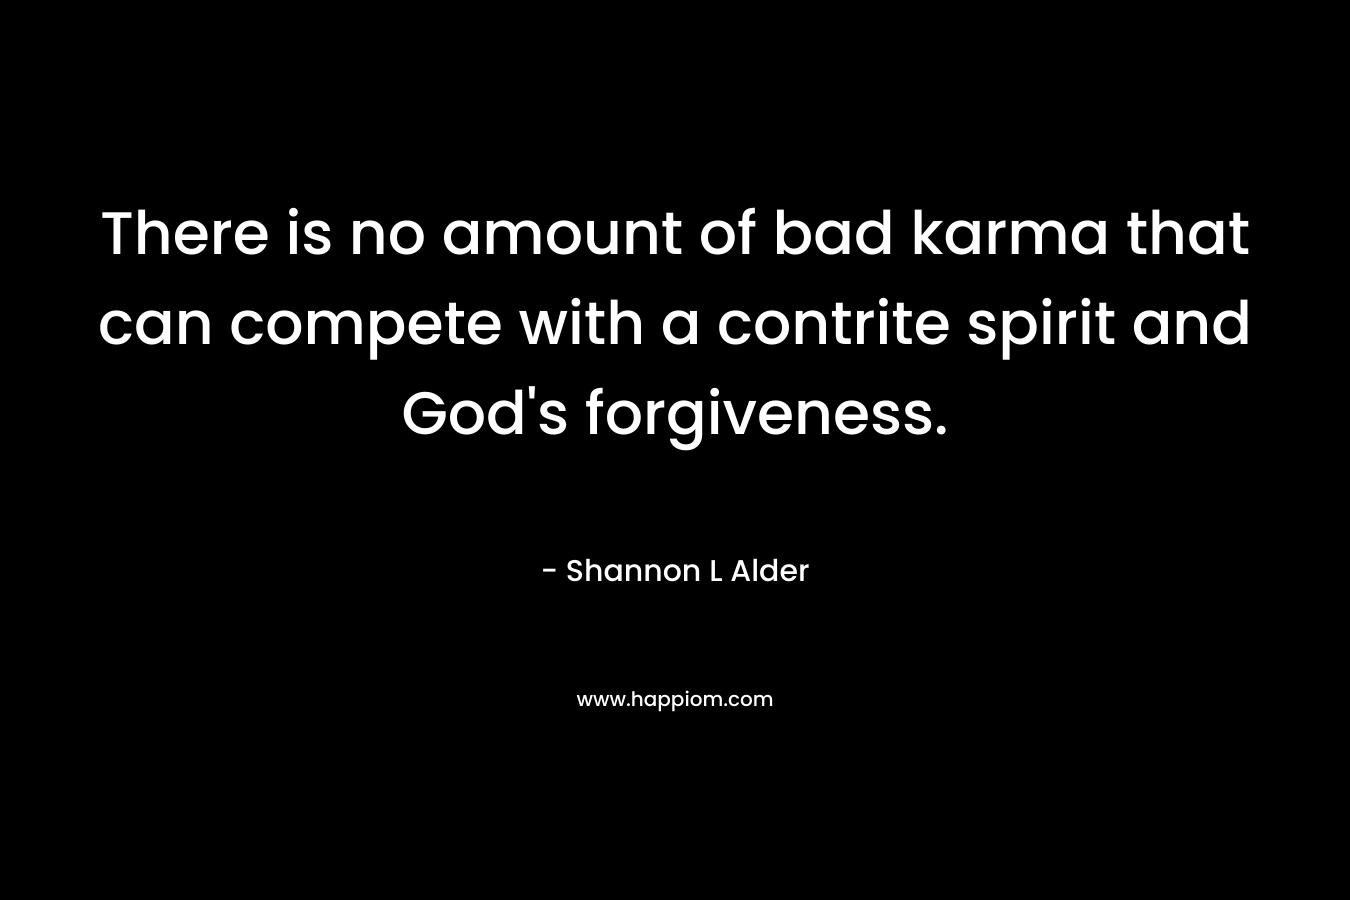 There is no amount of bad karma that can compete with a contrite spirit and God's forgiveness.